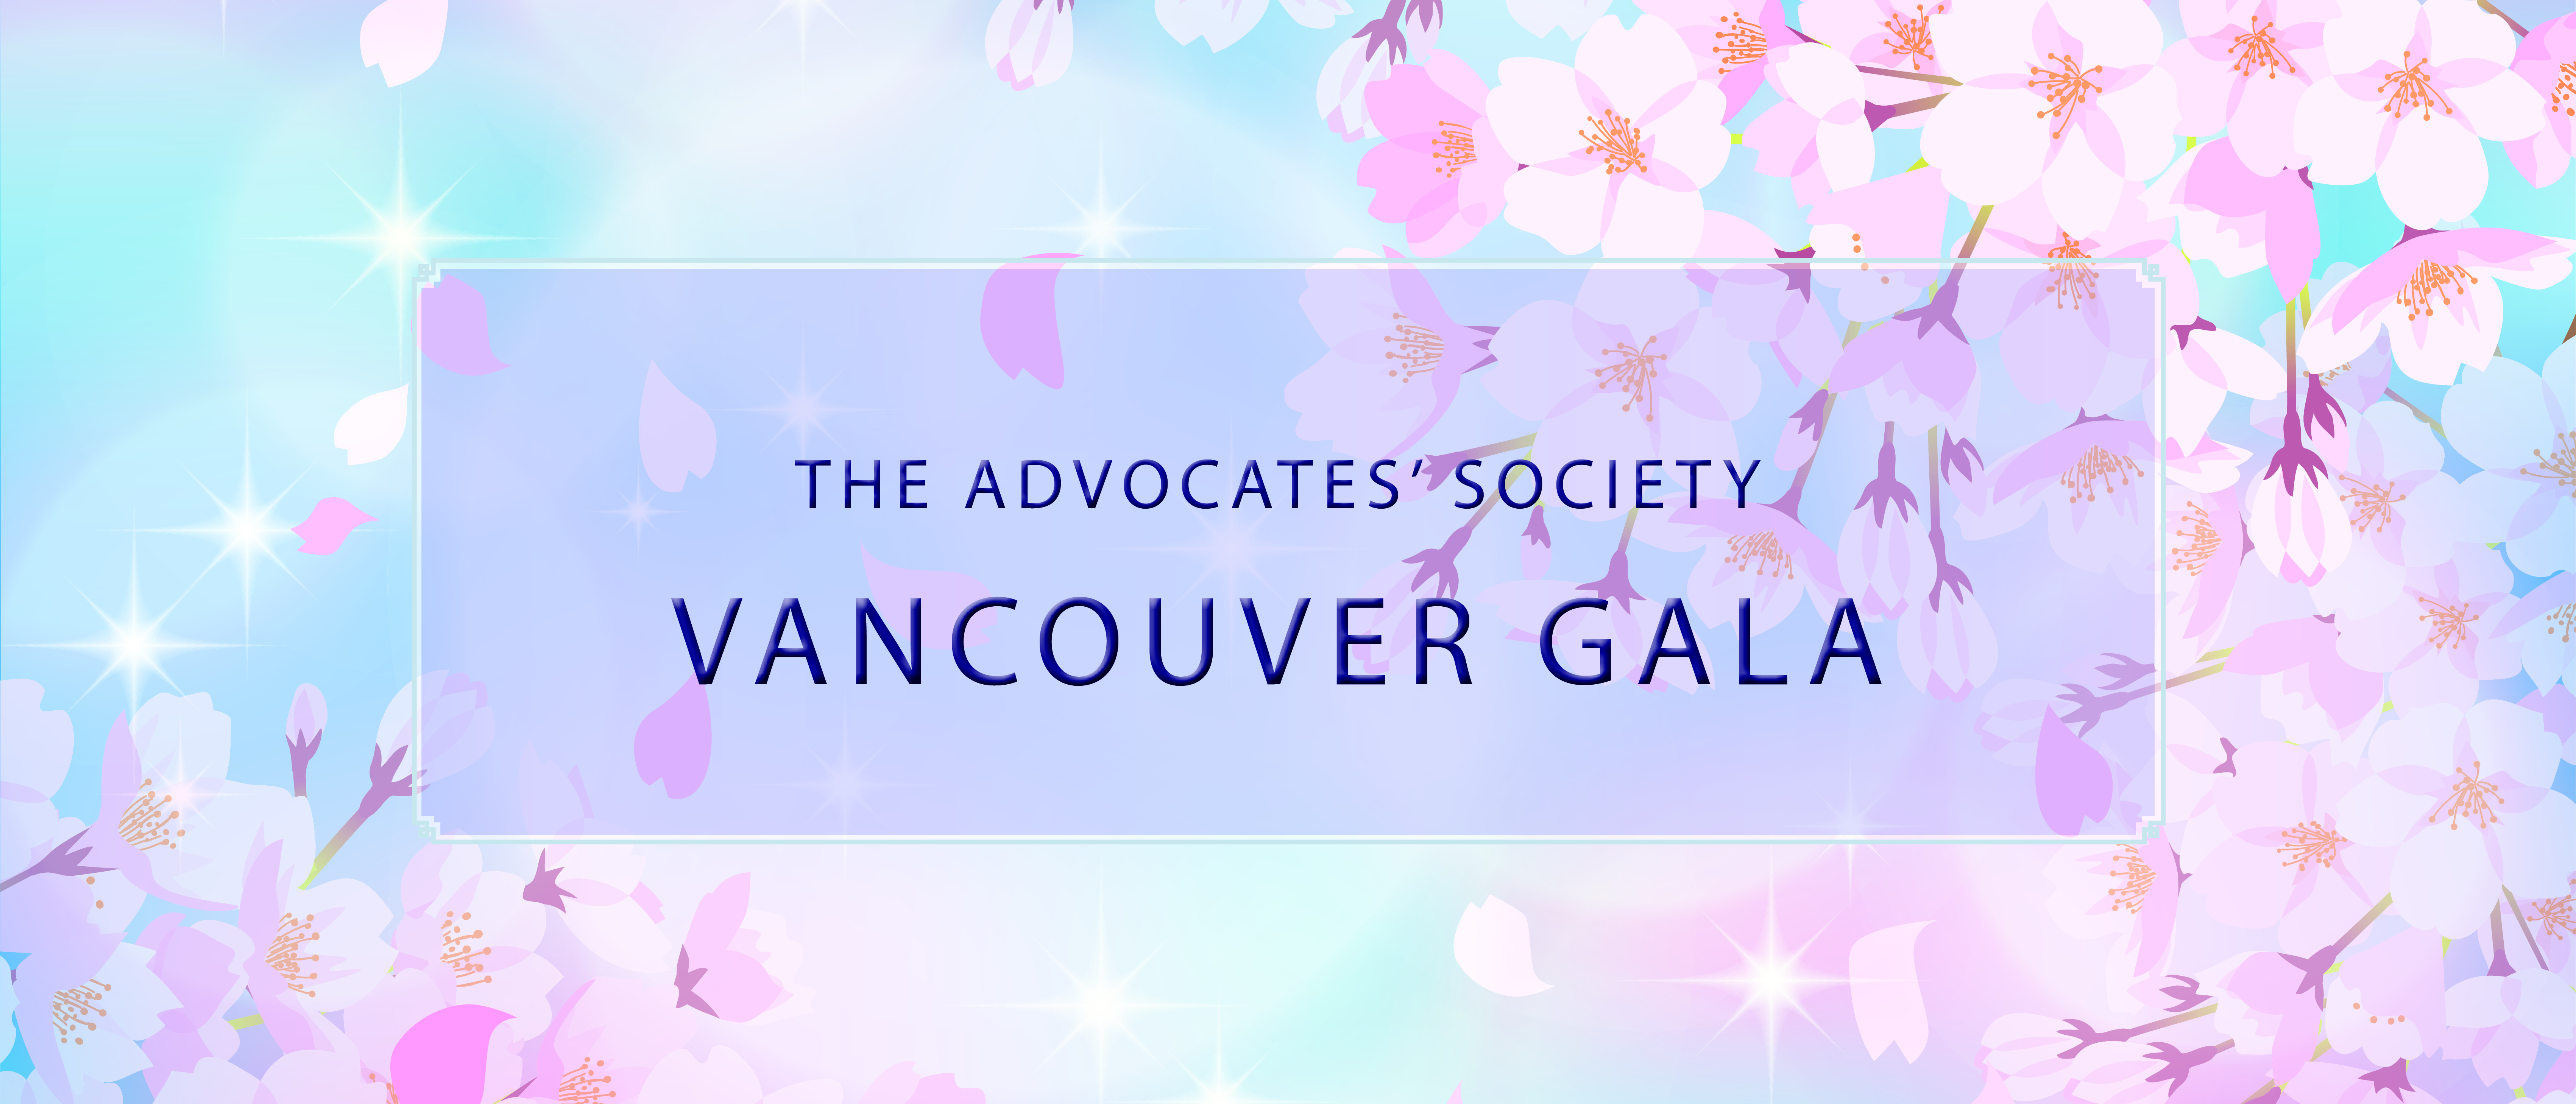 The Vancouver Gala